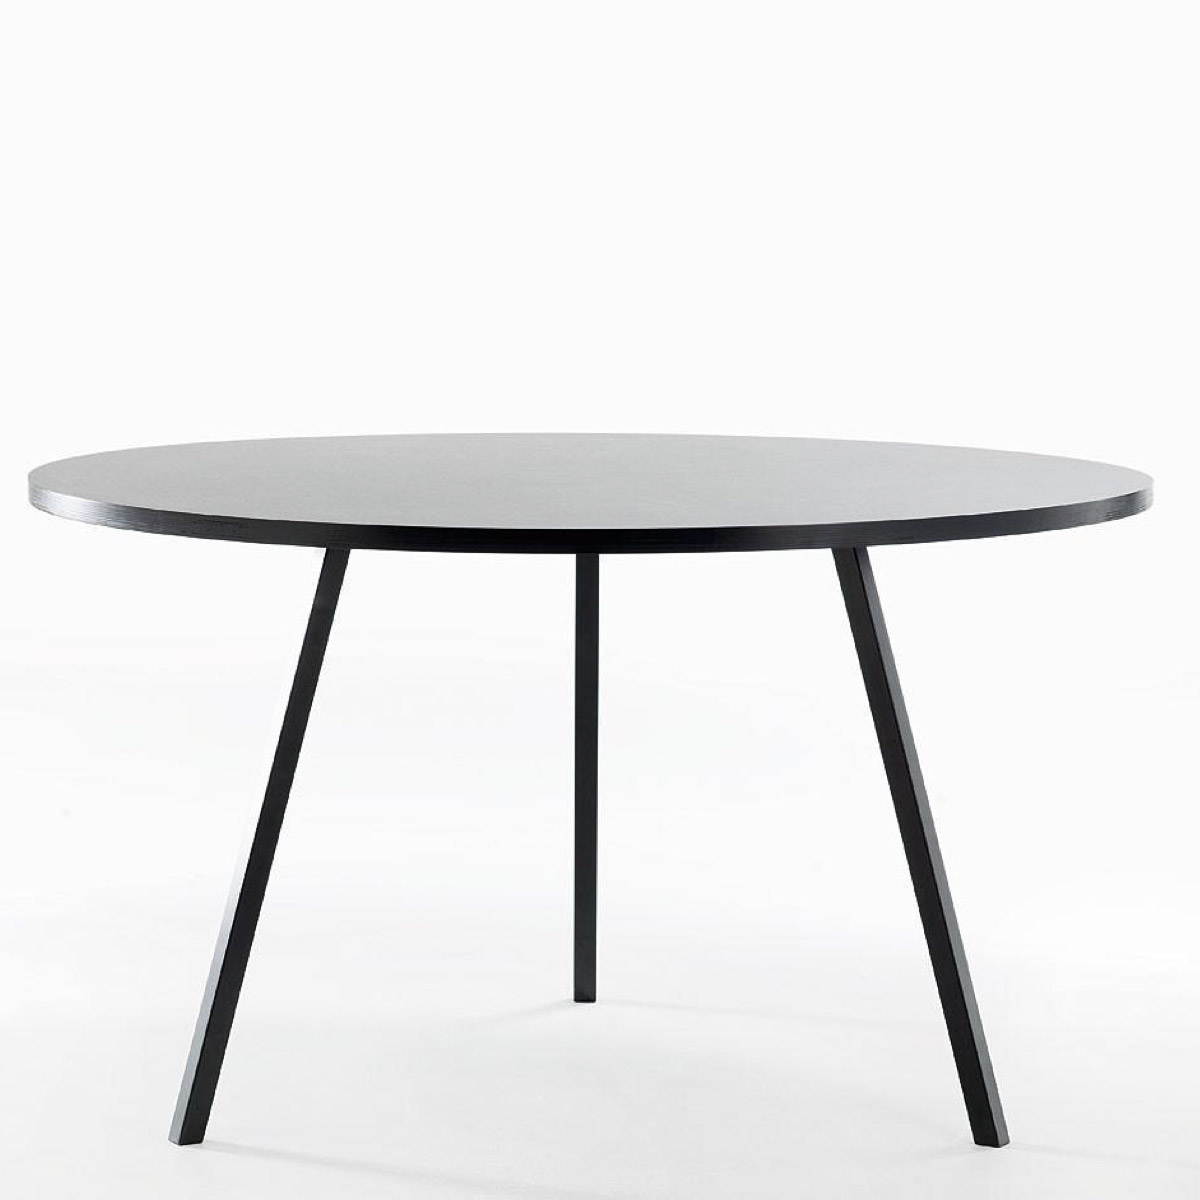 Loop Stand Round table